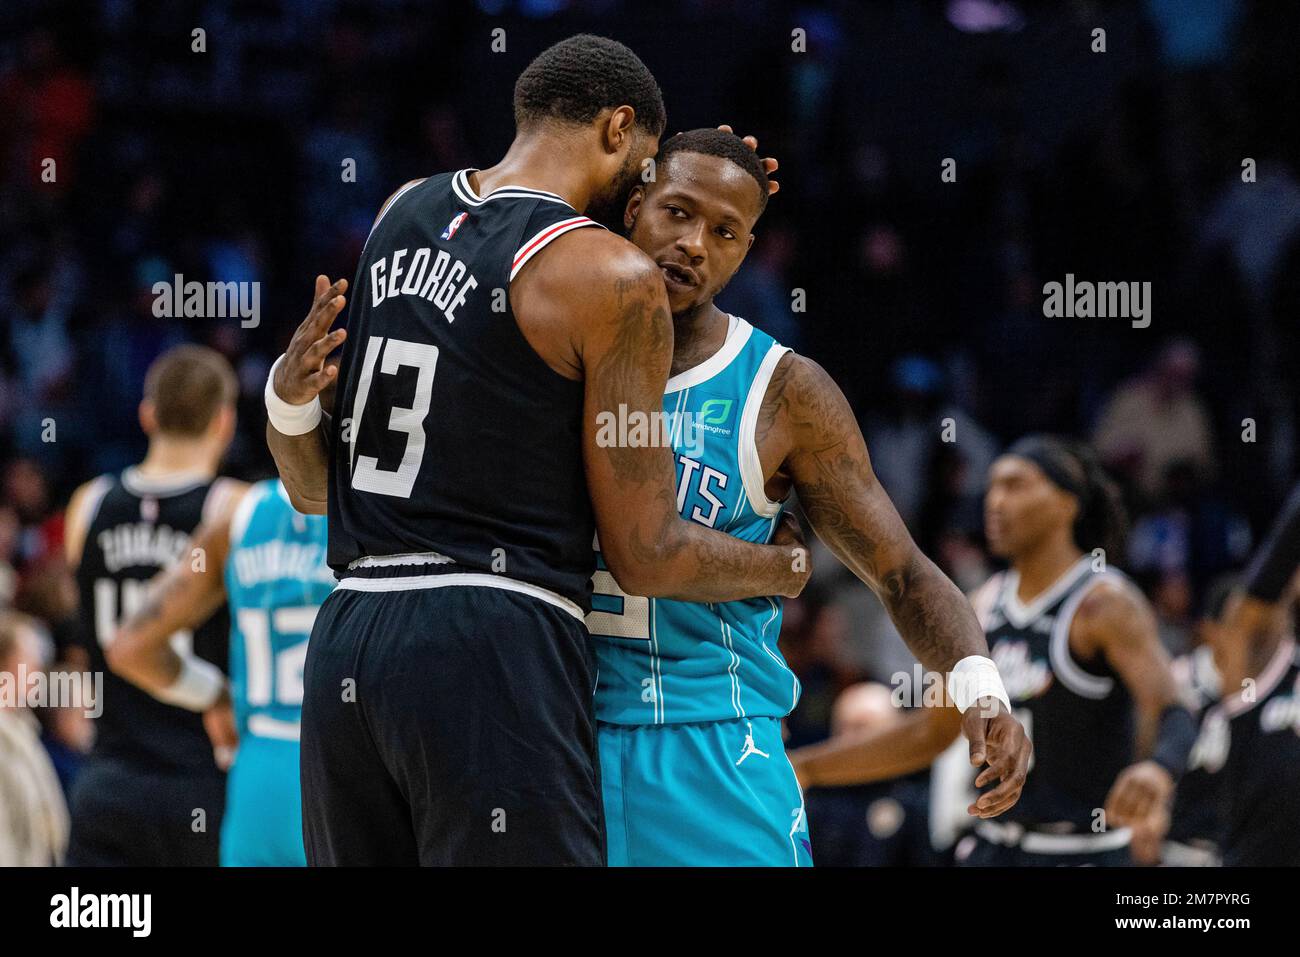 LA Clippers guard Paul George (13) hugs Charlotte Hornets guard Terry Rozier after an NBA basketball game on Monday, Dec